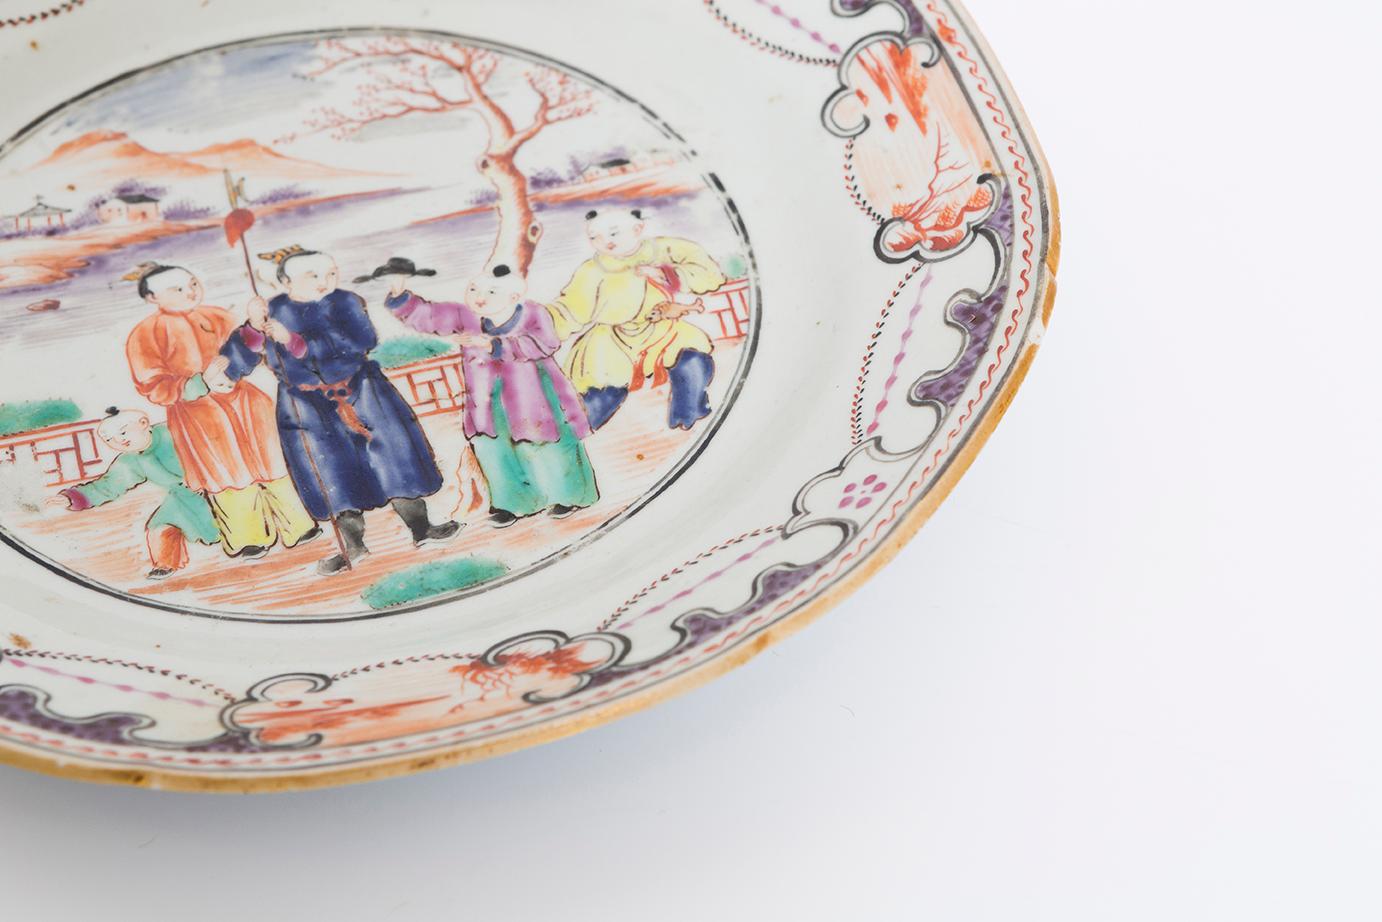 Pair of 19th century export plates with figures and a scallop design around the edge in multi colors.